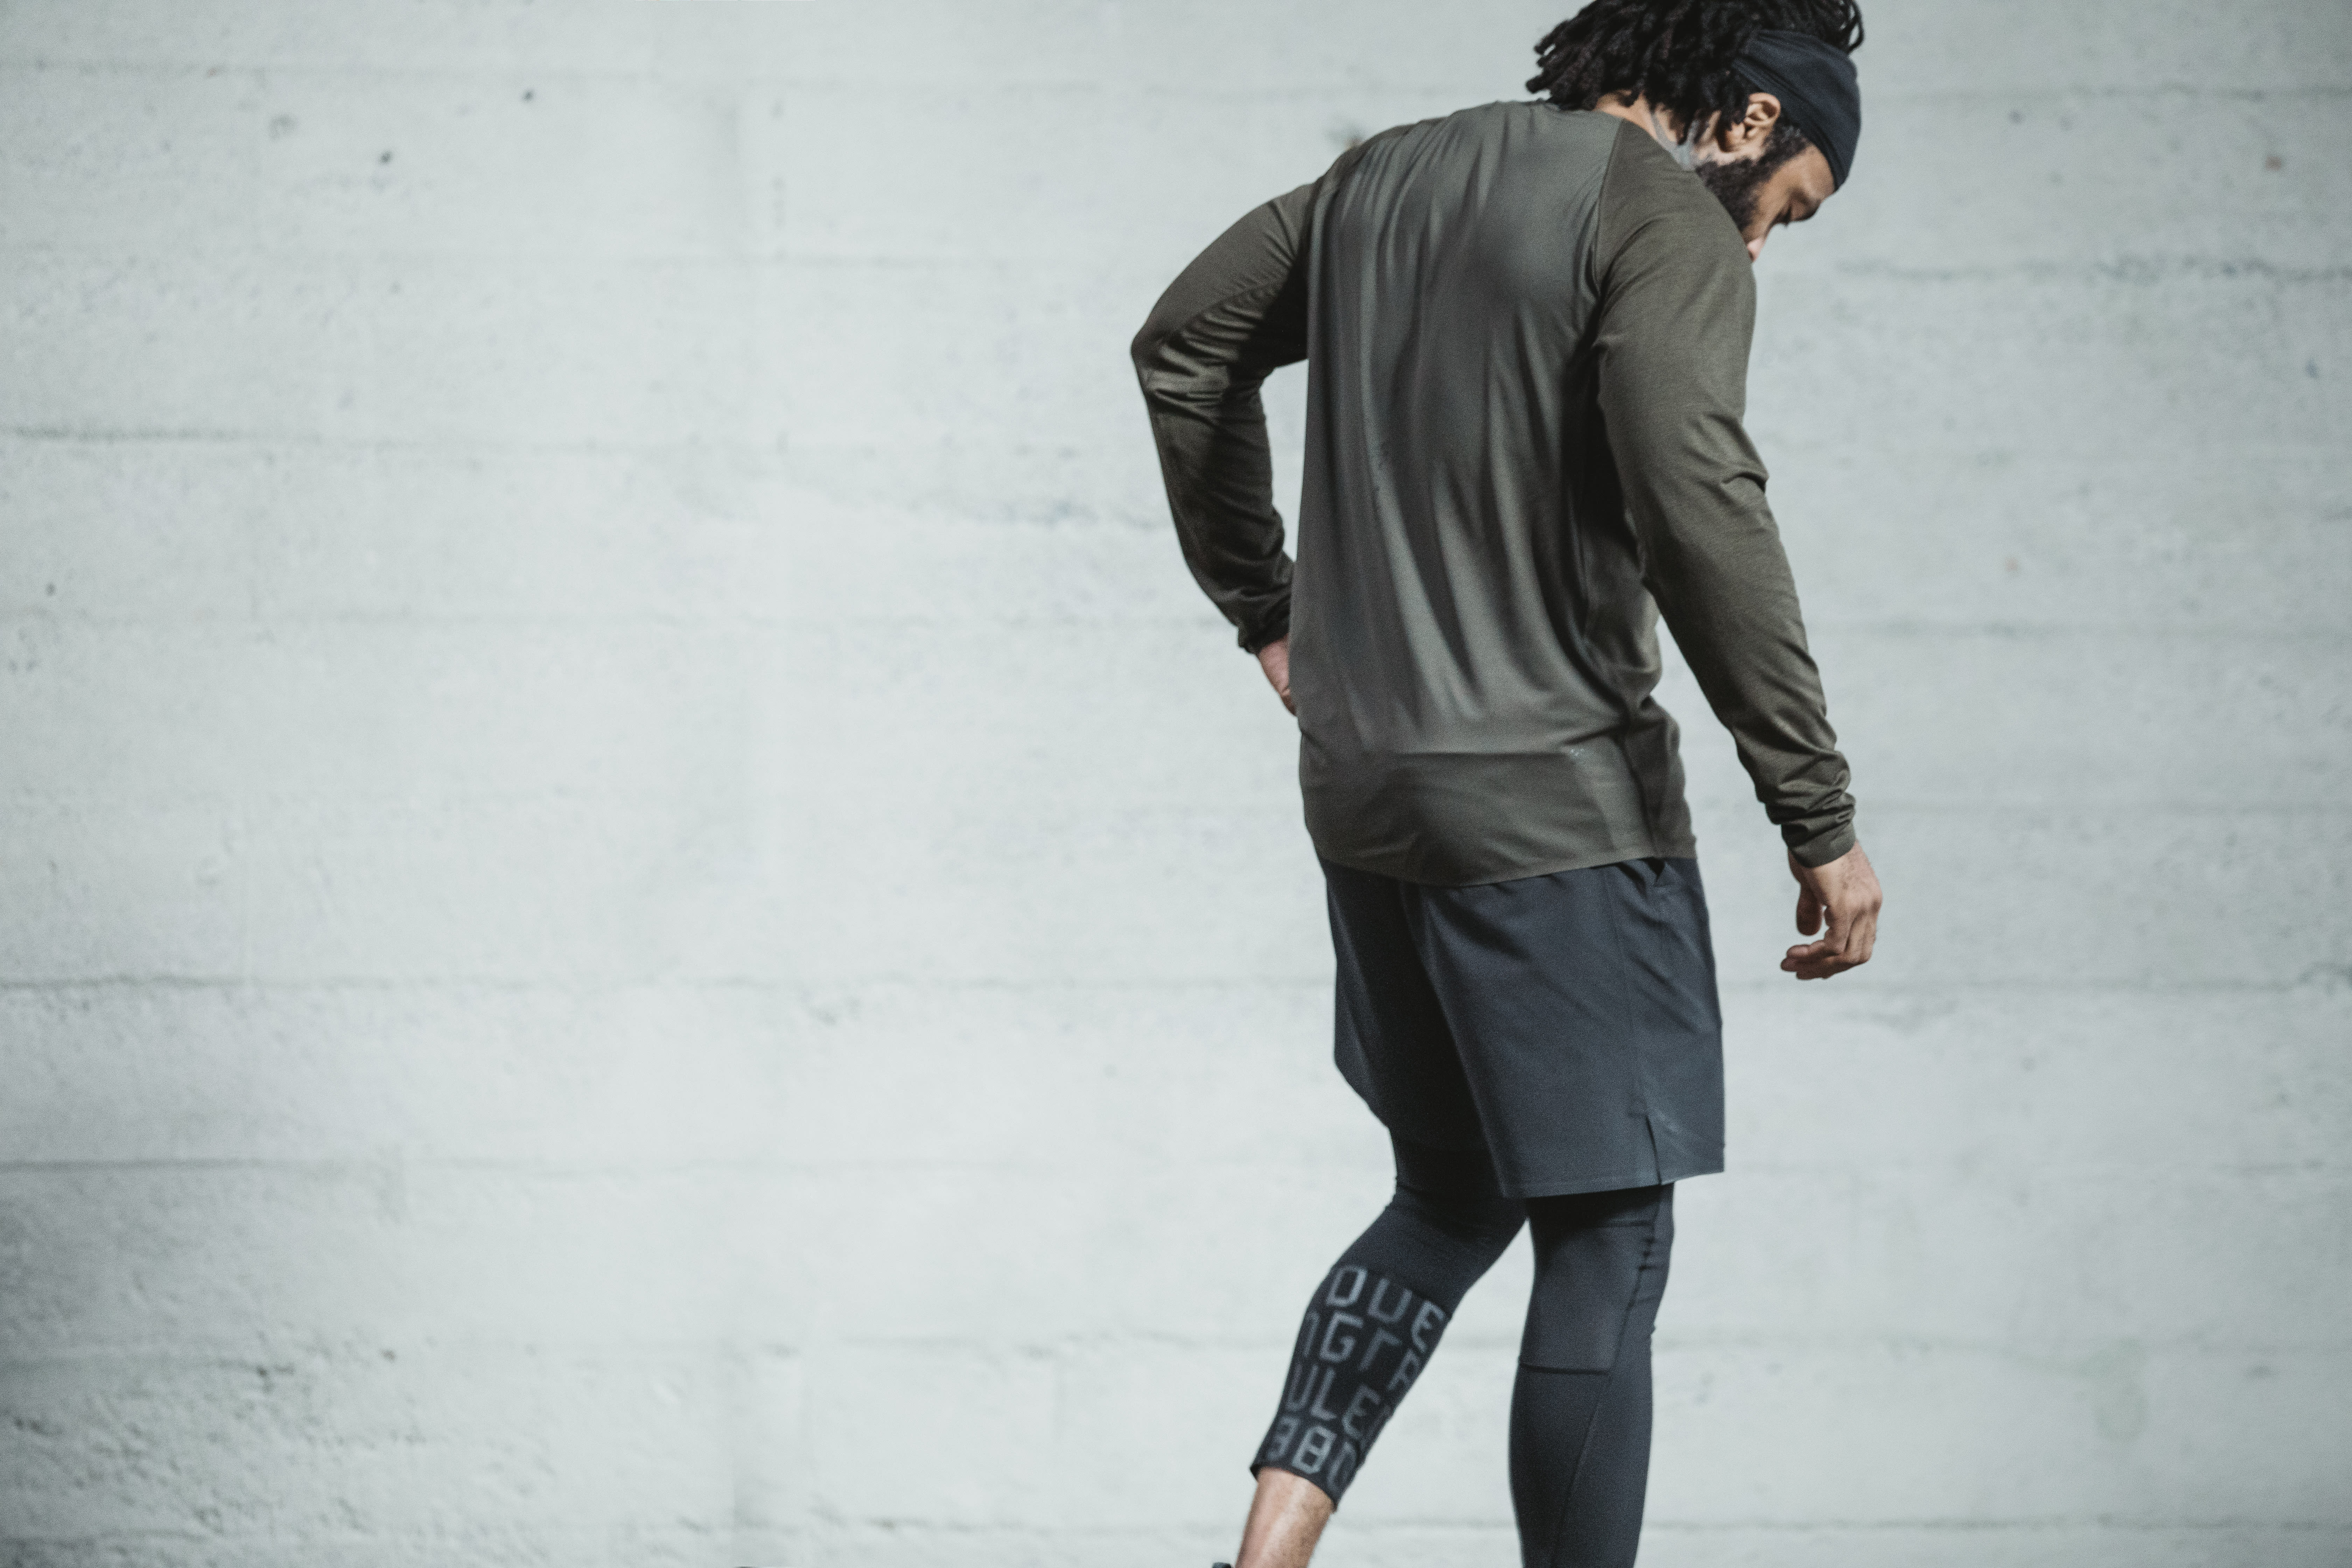 Lululemon X Roden Gray: Vancouver Fashion Brands Launch New Collaboration